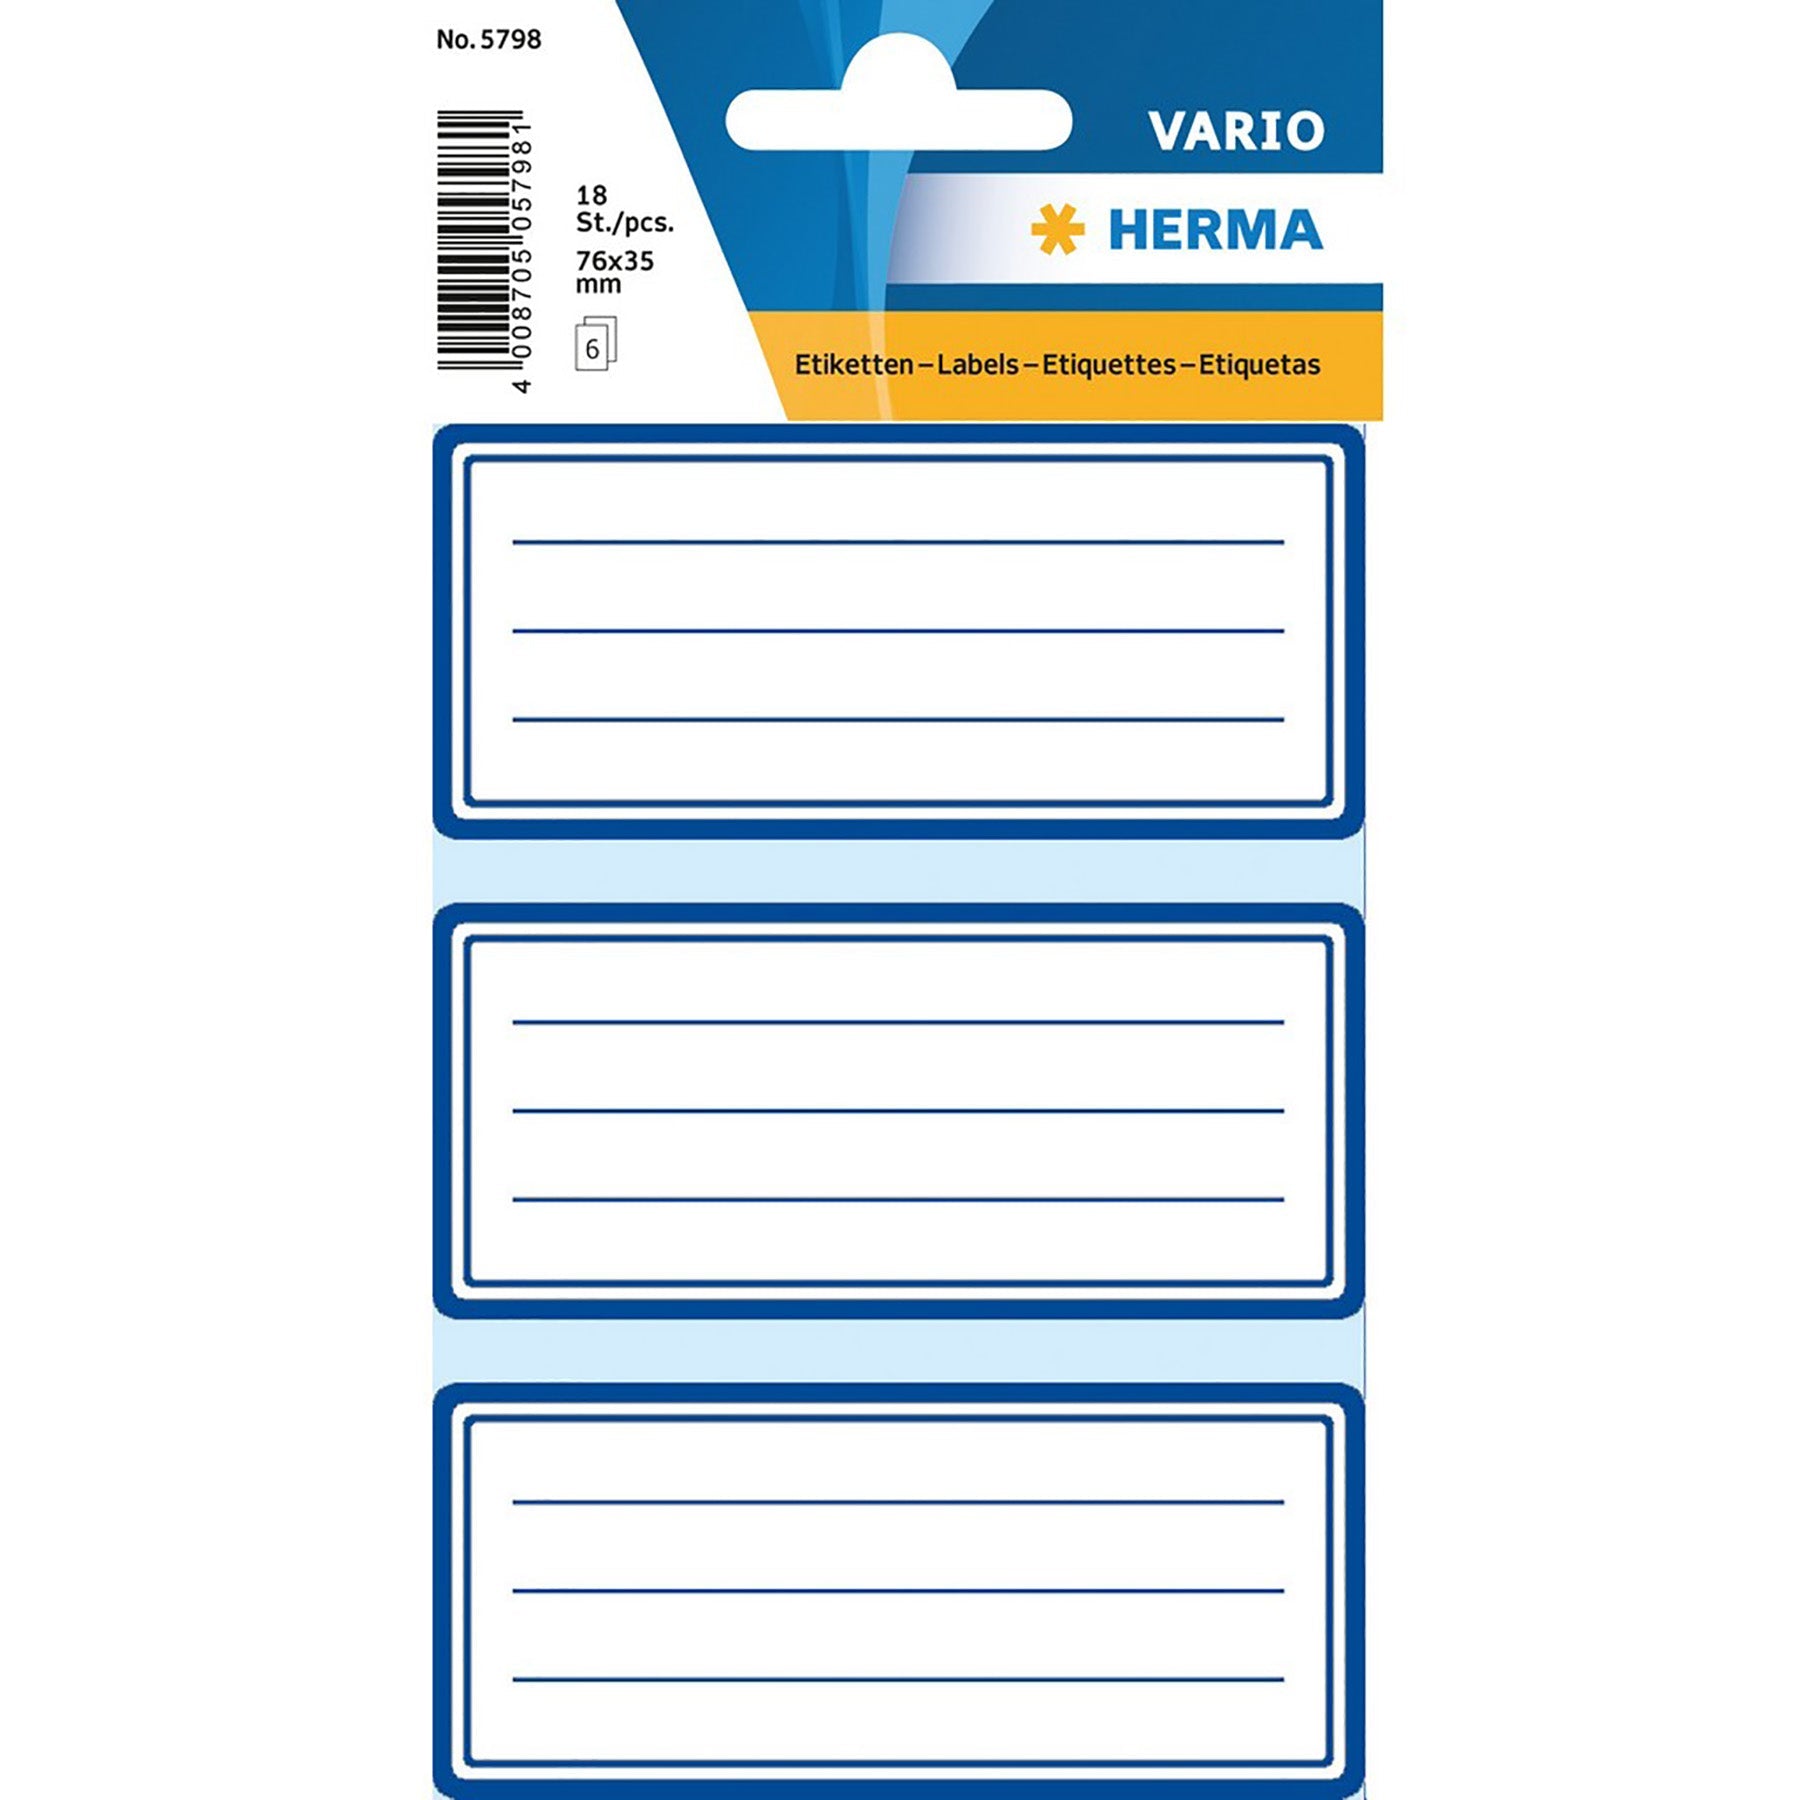 Herma Vario 6 Sheets School Labels Blue Frame Lined 3x1.37in each